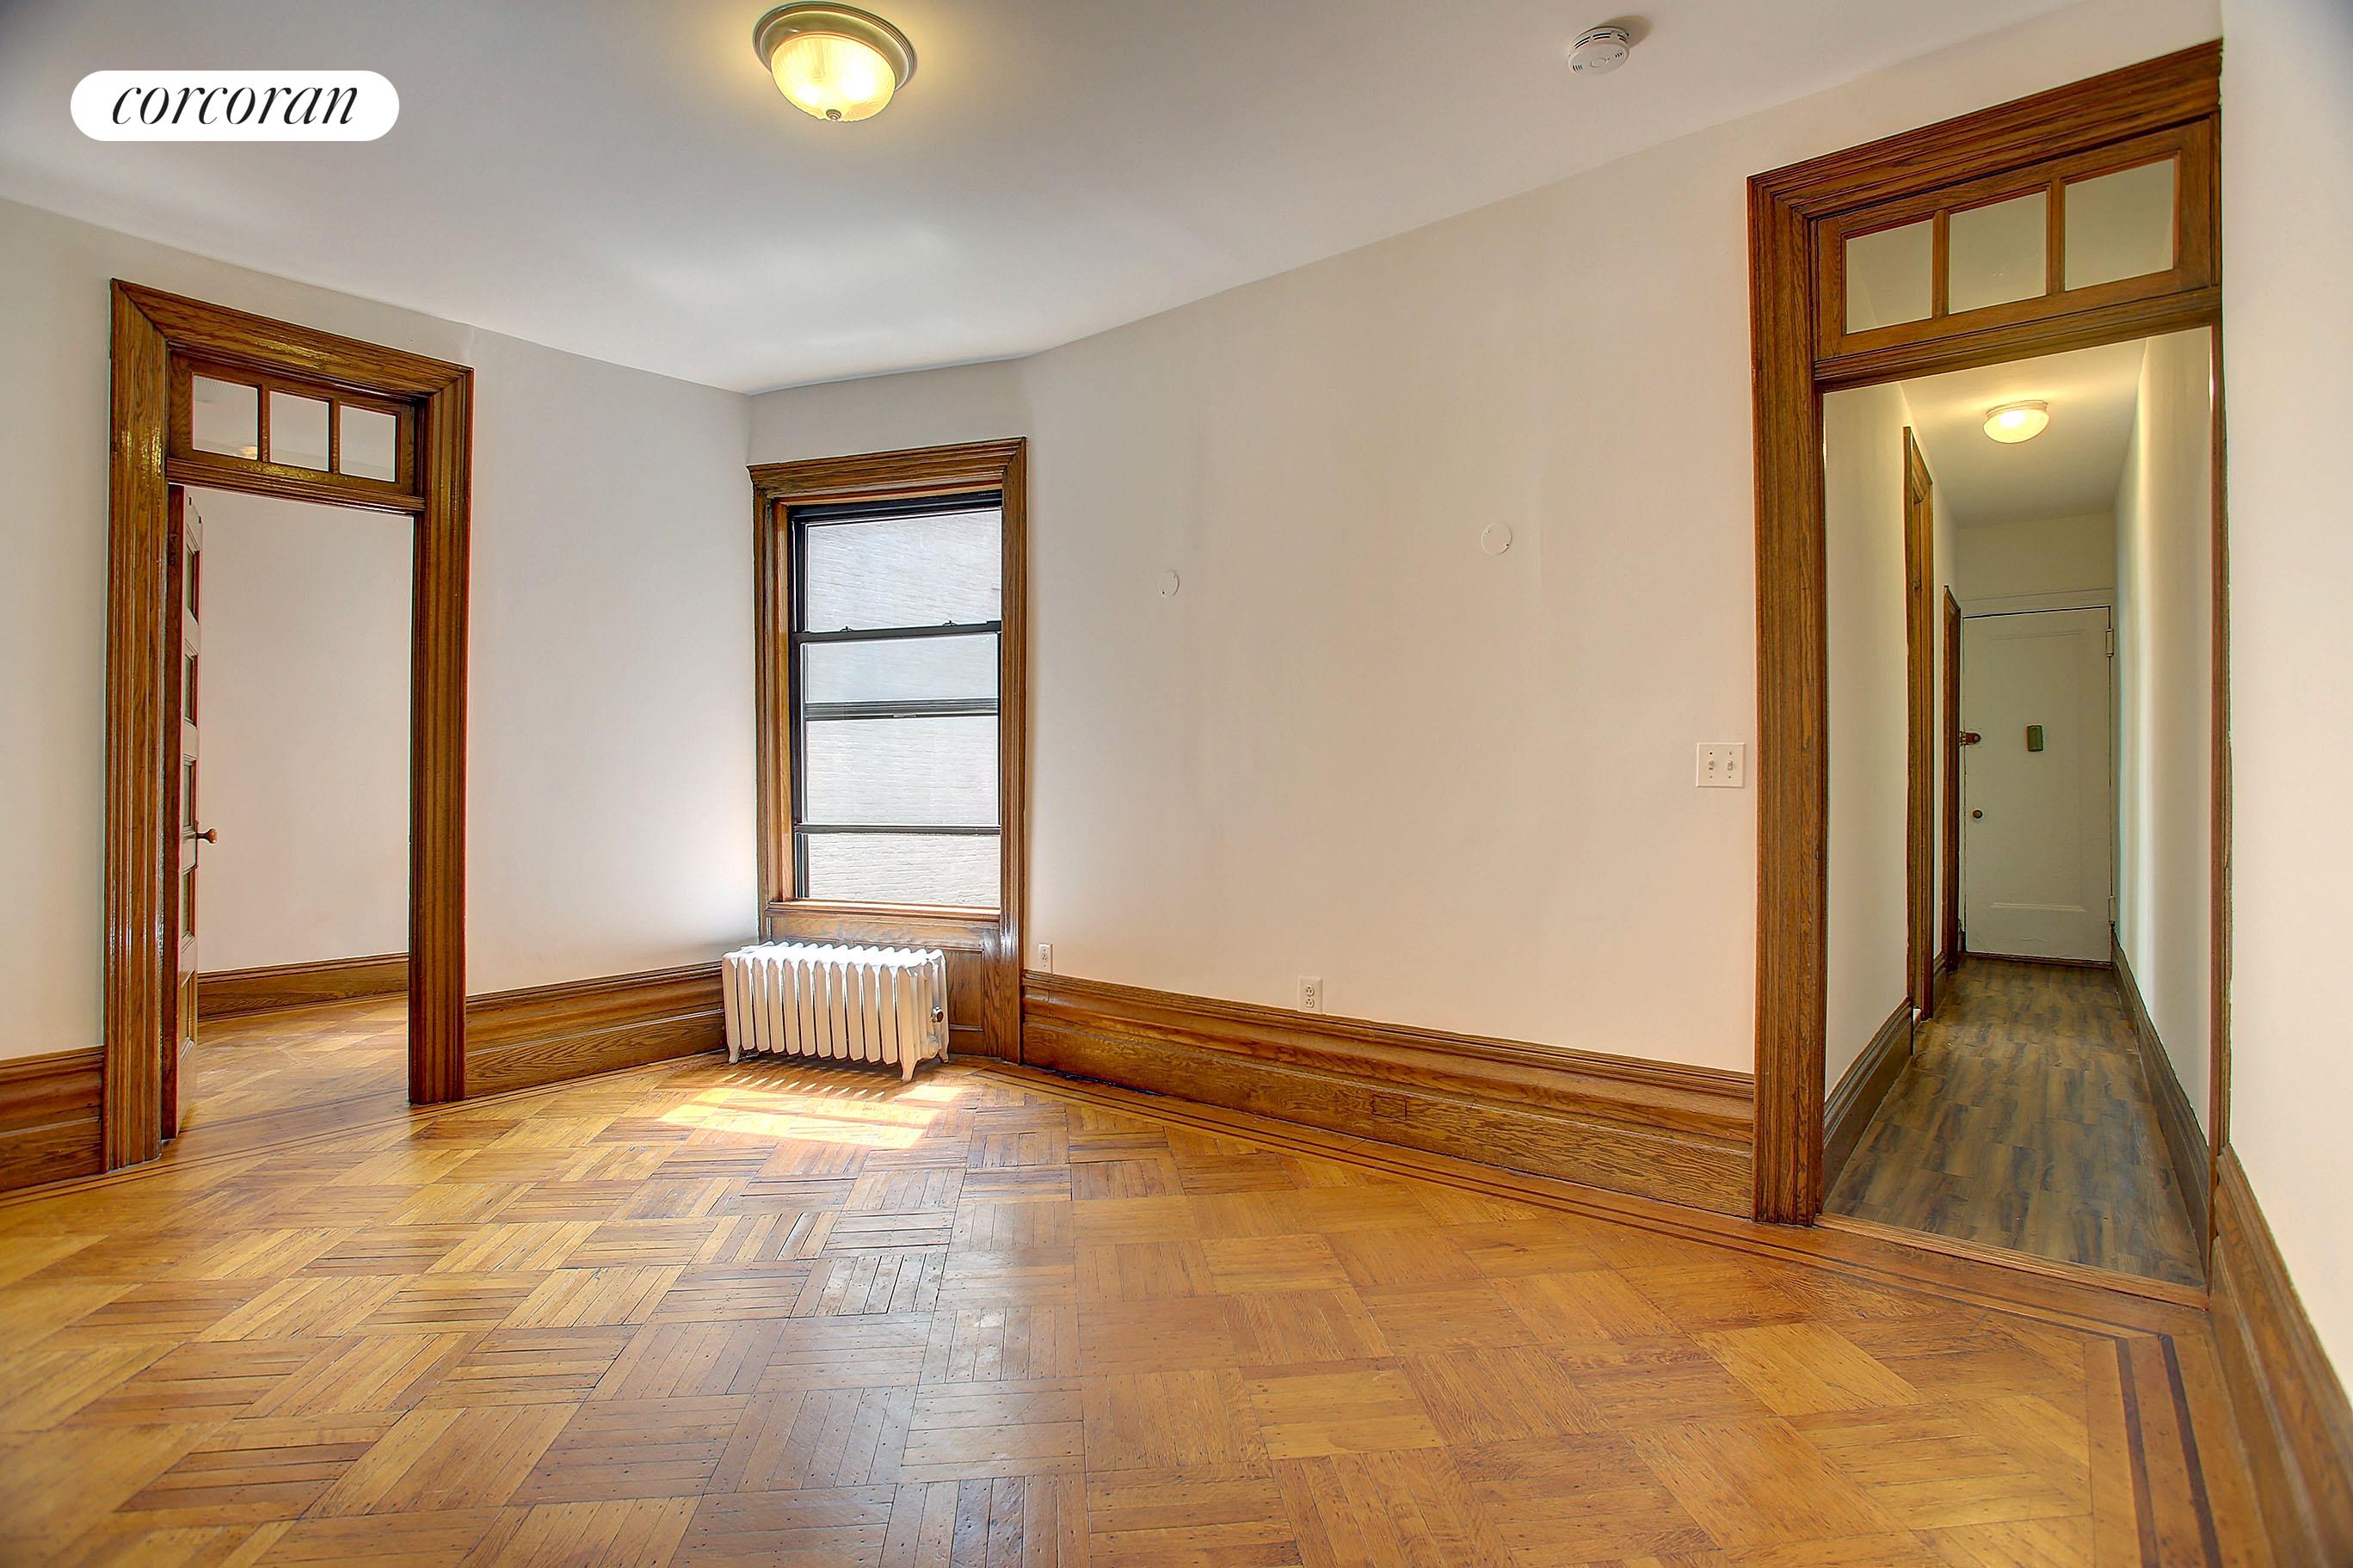 230 West 108th Street 4A, Upper West Side, Upper West Side, NYC - 4 Bedrooms  
1 Bathrooms  
7 Rooms - 